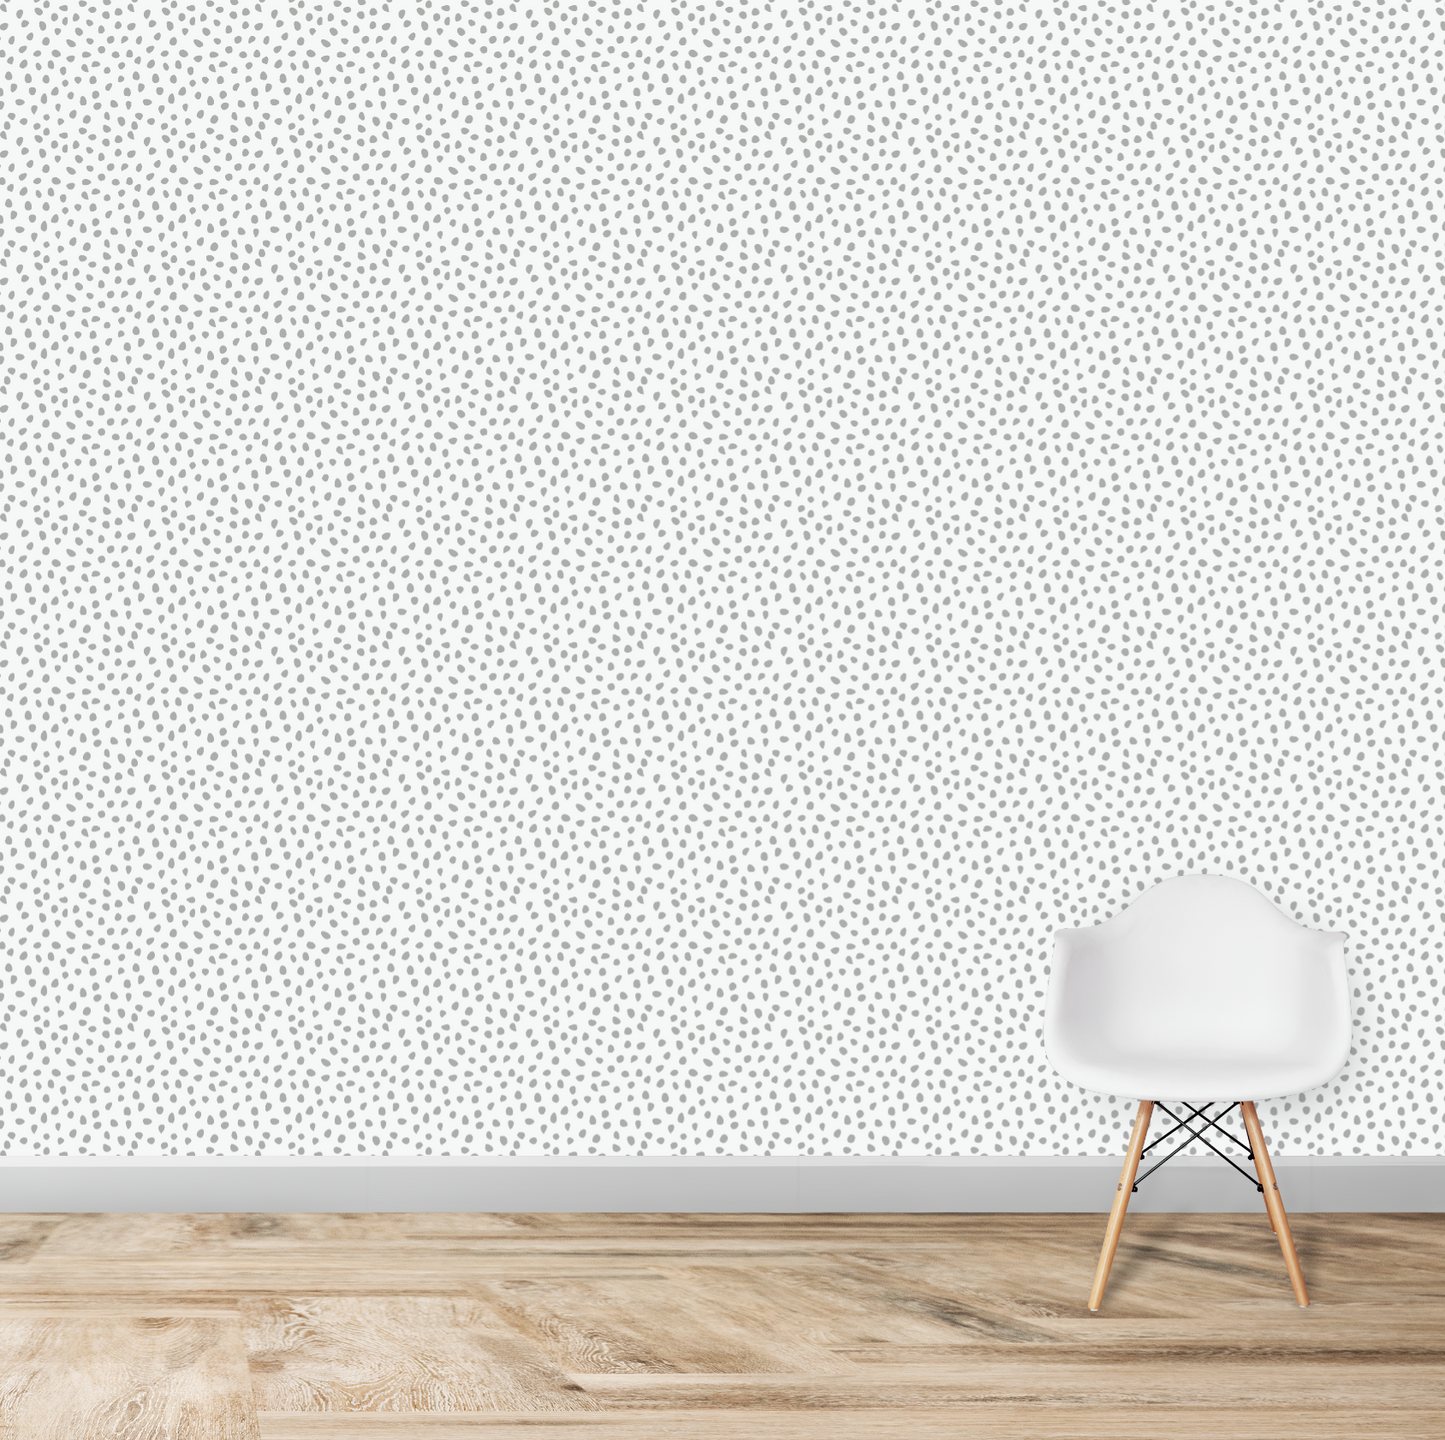 Load image into Gallery viewer, Sprinkle Wallpaper Repeat Pattern | Grey - Munks and Me Wallpaper
